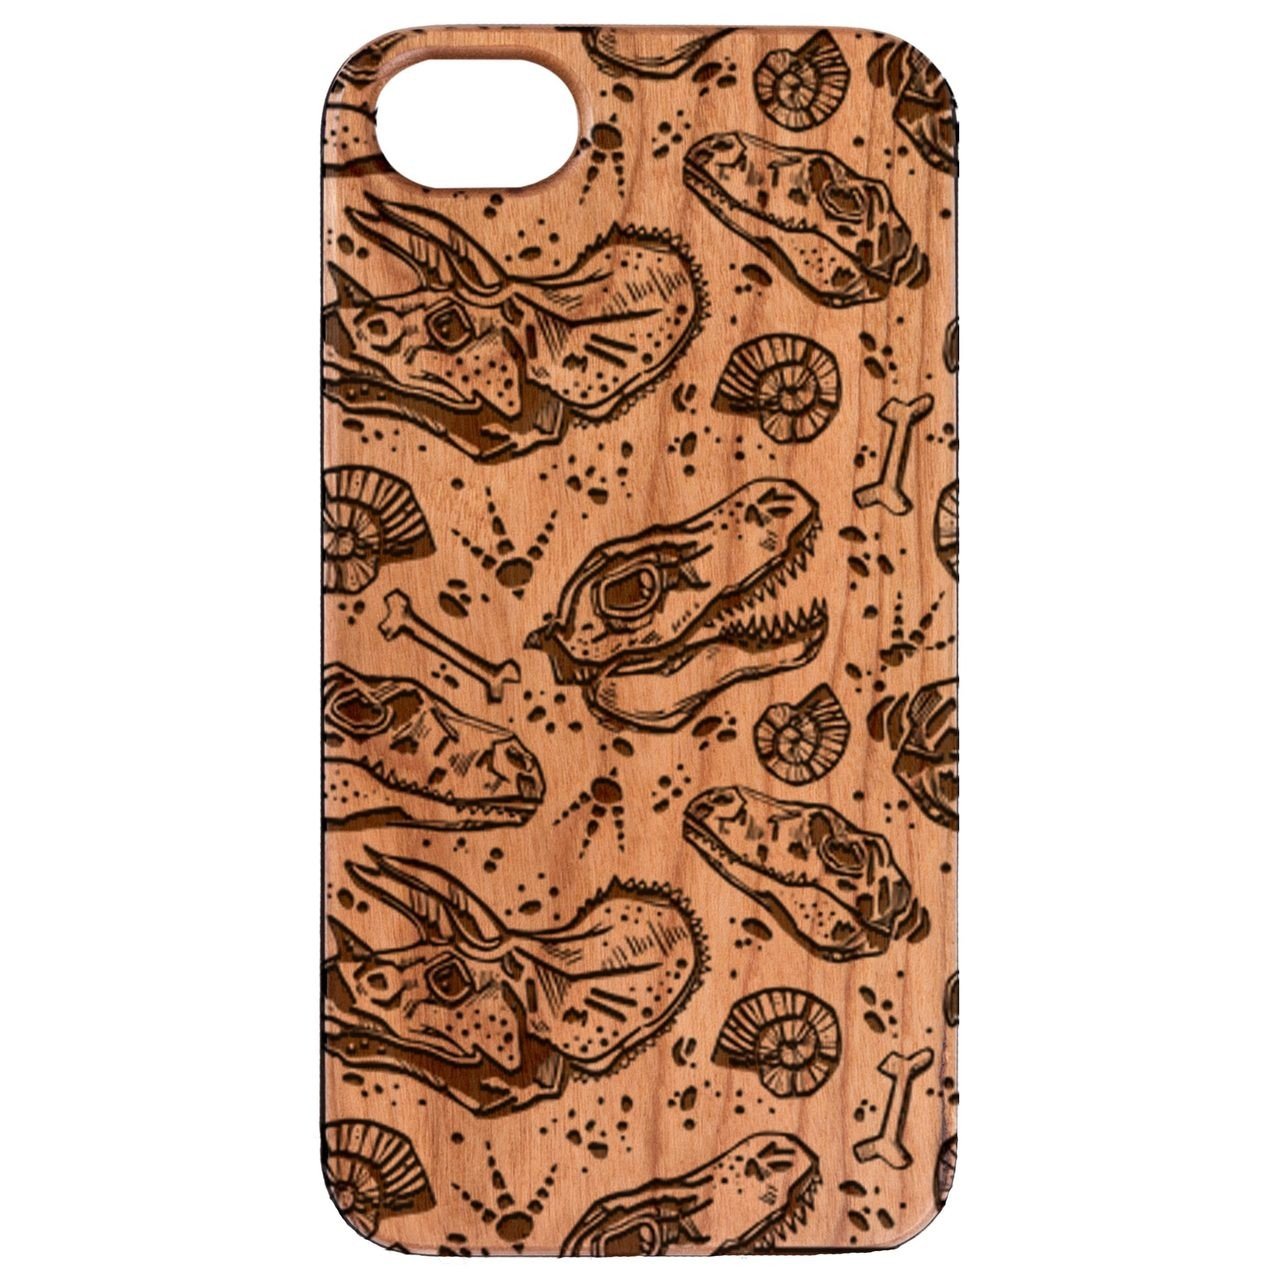 Dinosaur Fossil - Engraved - Wooden Phone Case